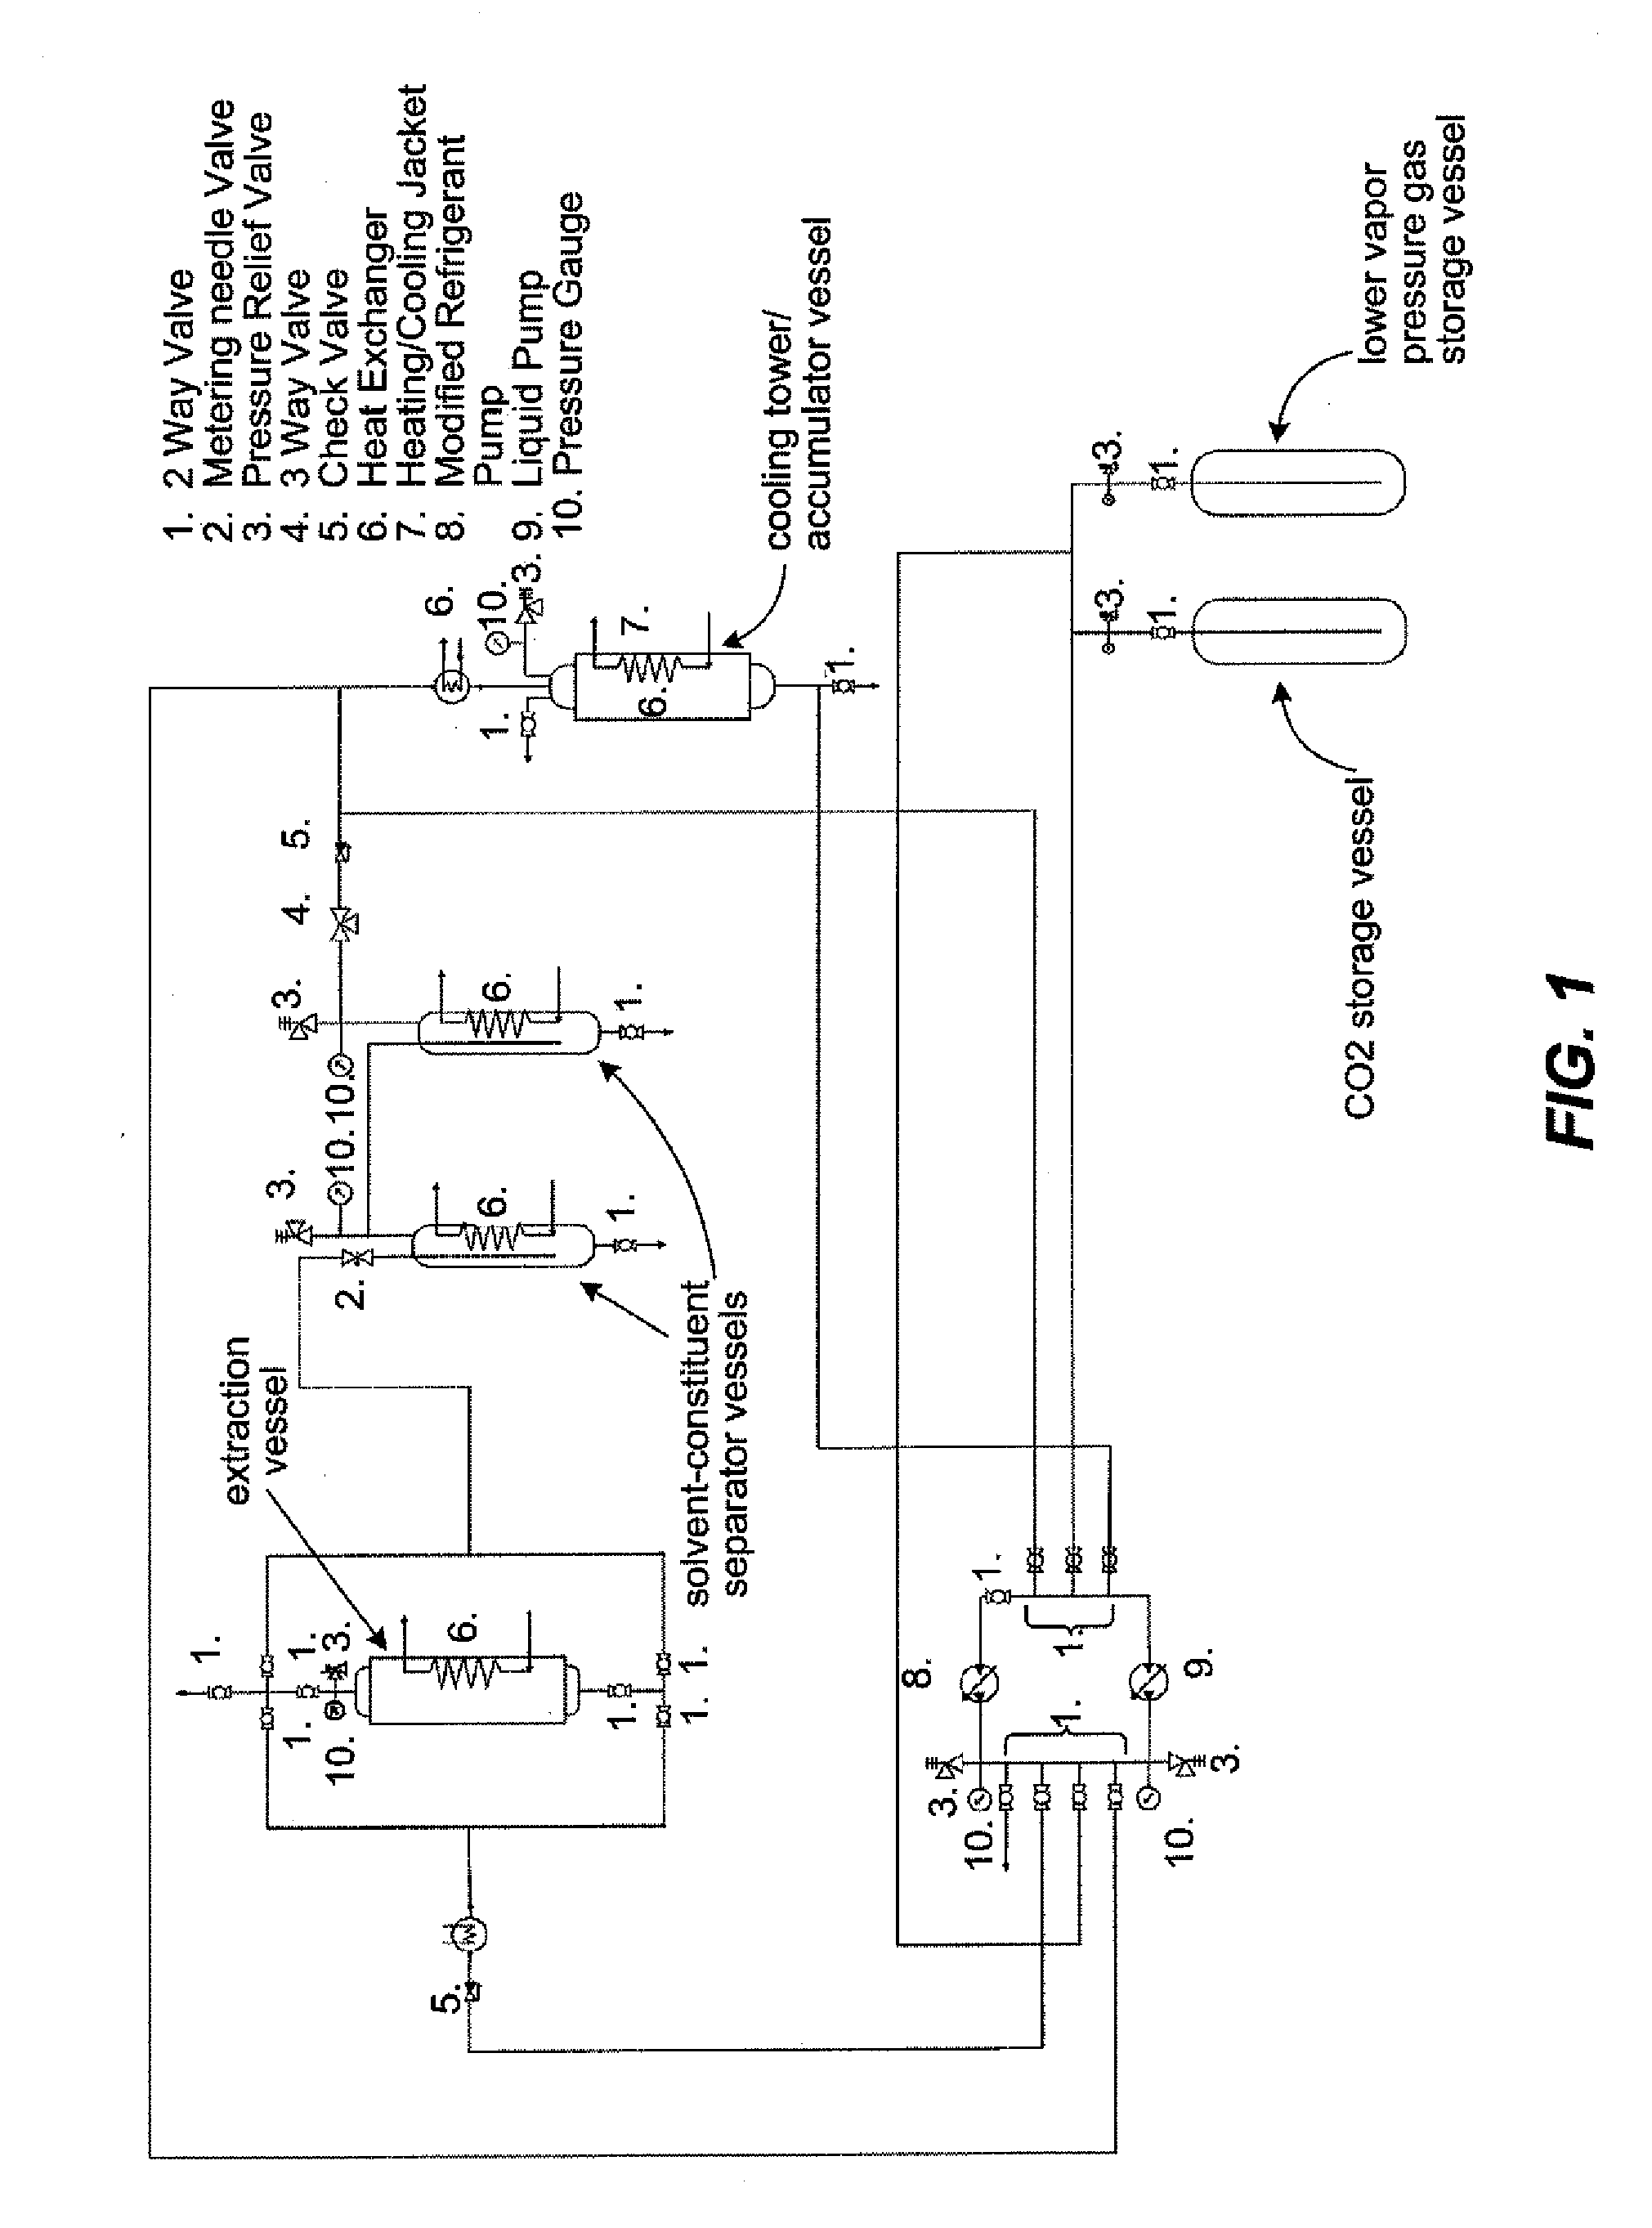 Closed loop supercritical and subcritical carbon dioxide extraction system for working with multiple compressed gases